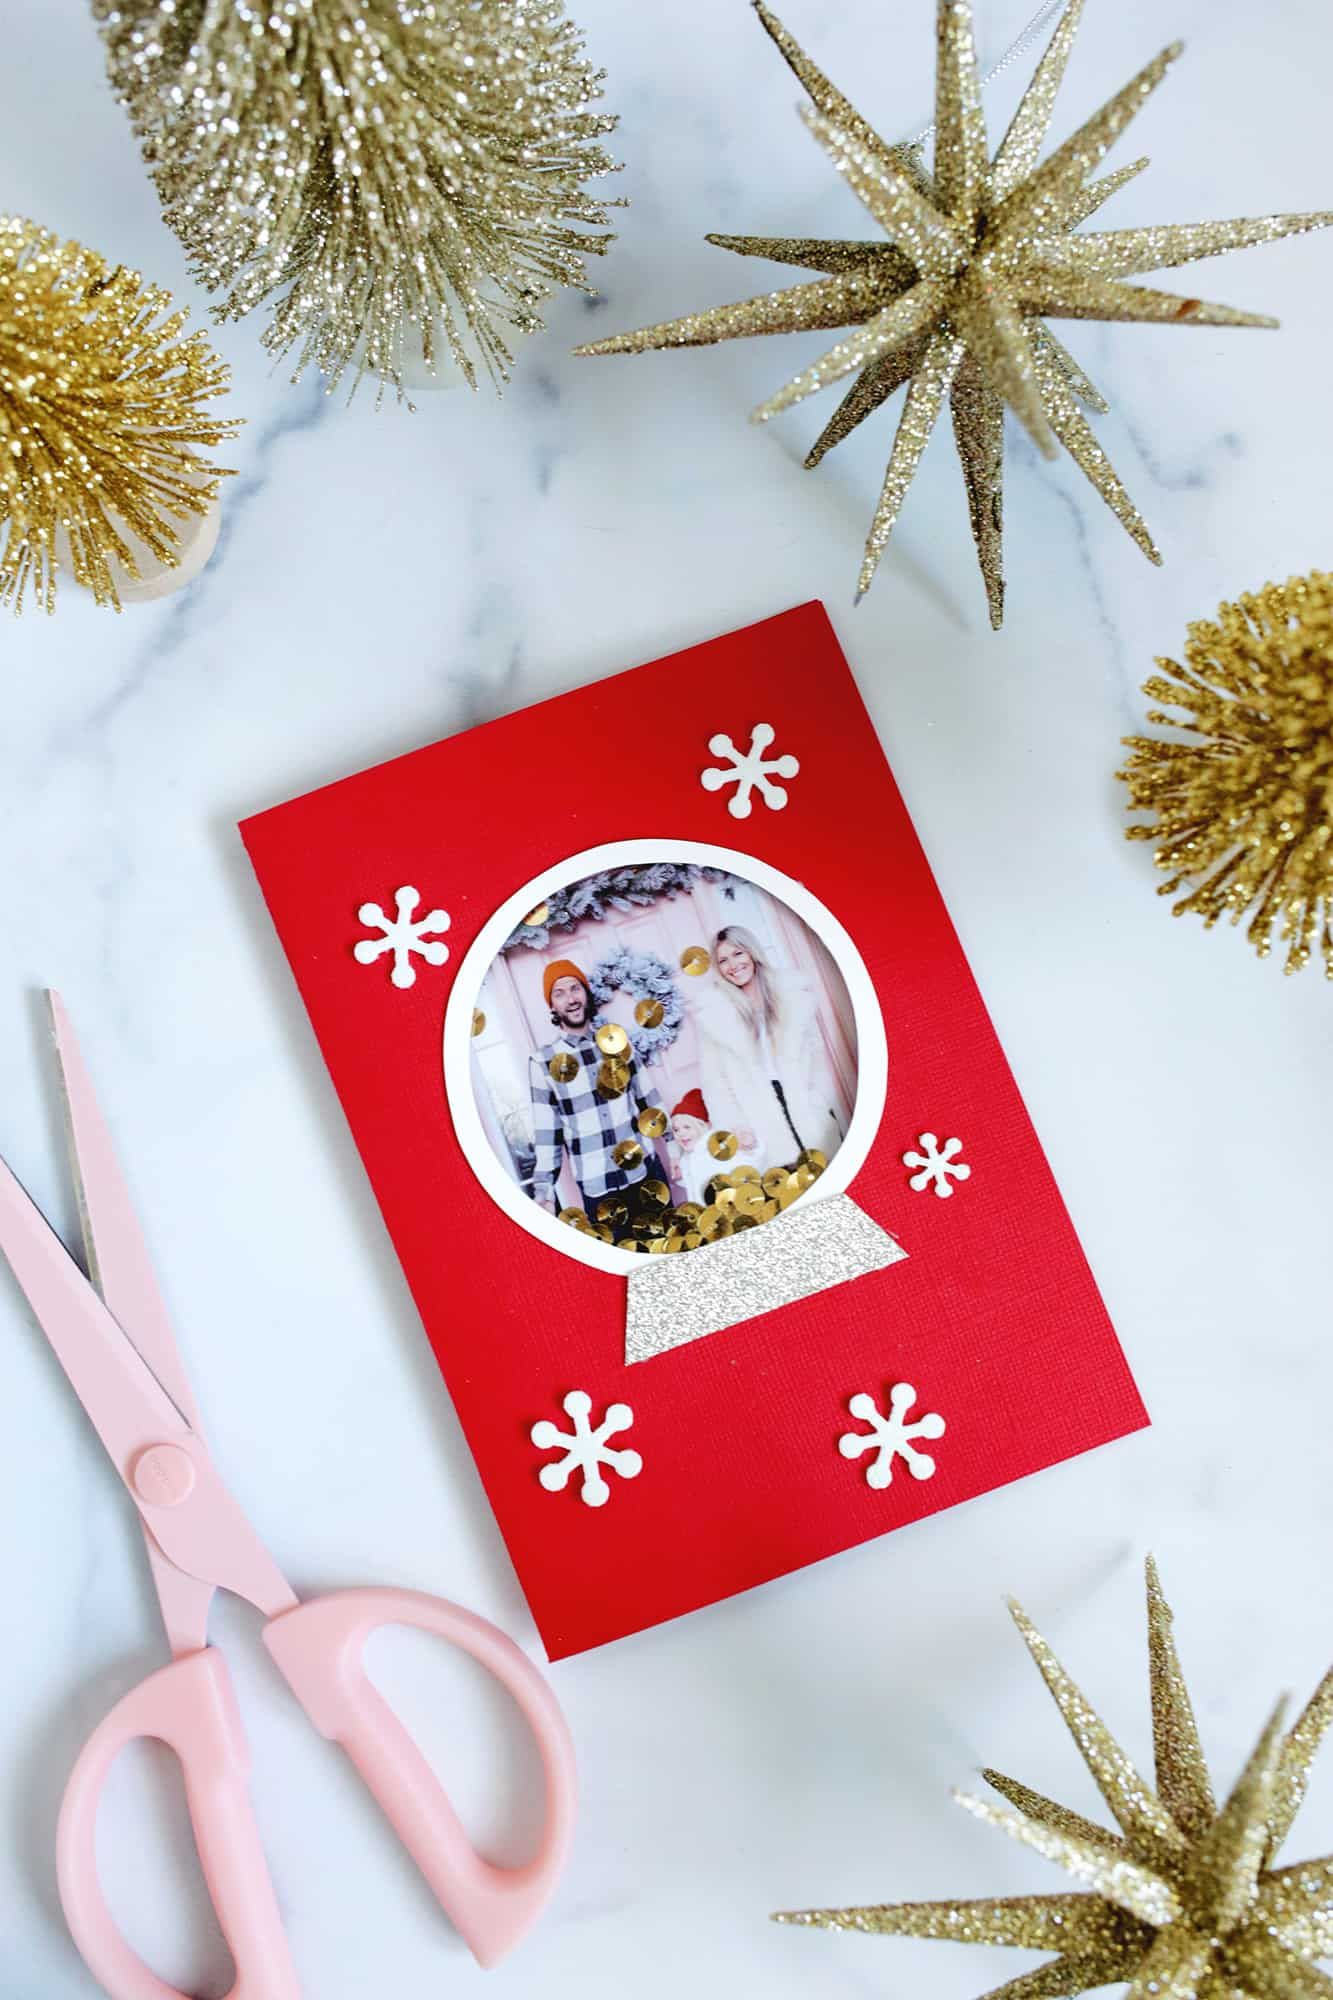 Digital DIY Christmas Cards: 6 Tips to Craft the Perfect Design